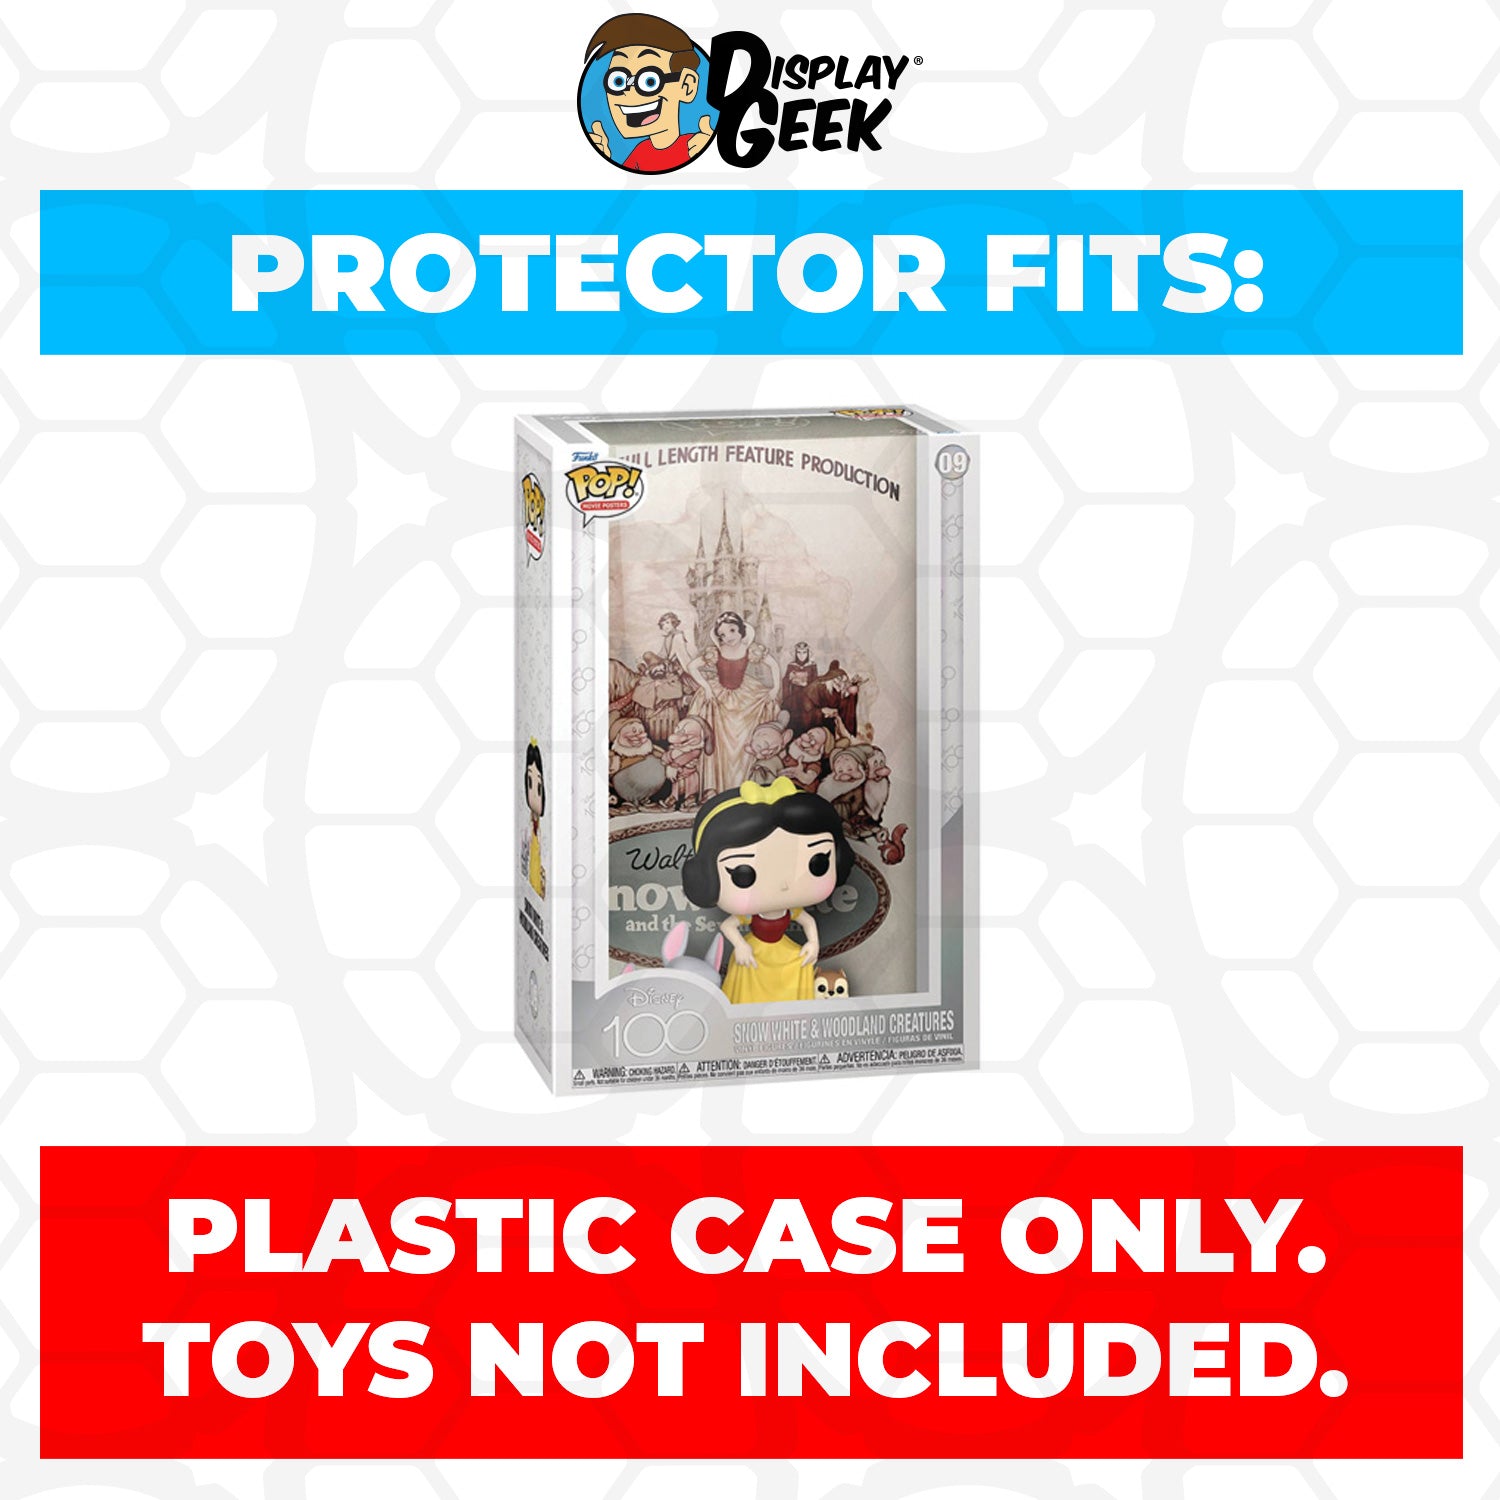 Pop Protector for Snow White & Woodland Creatures #09 Funko Pop Movie Posters - PPG Pop Protector Guide Search Created by Display Geek